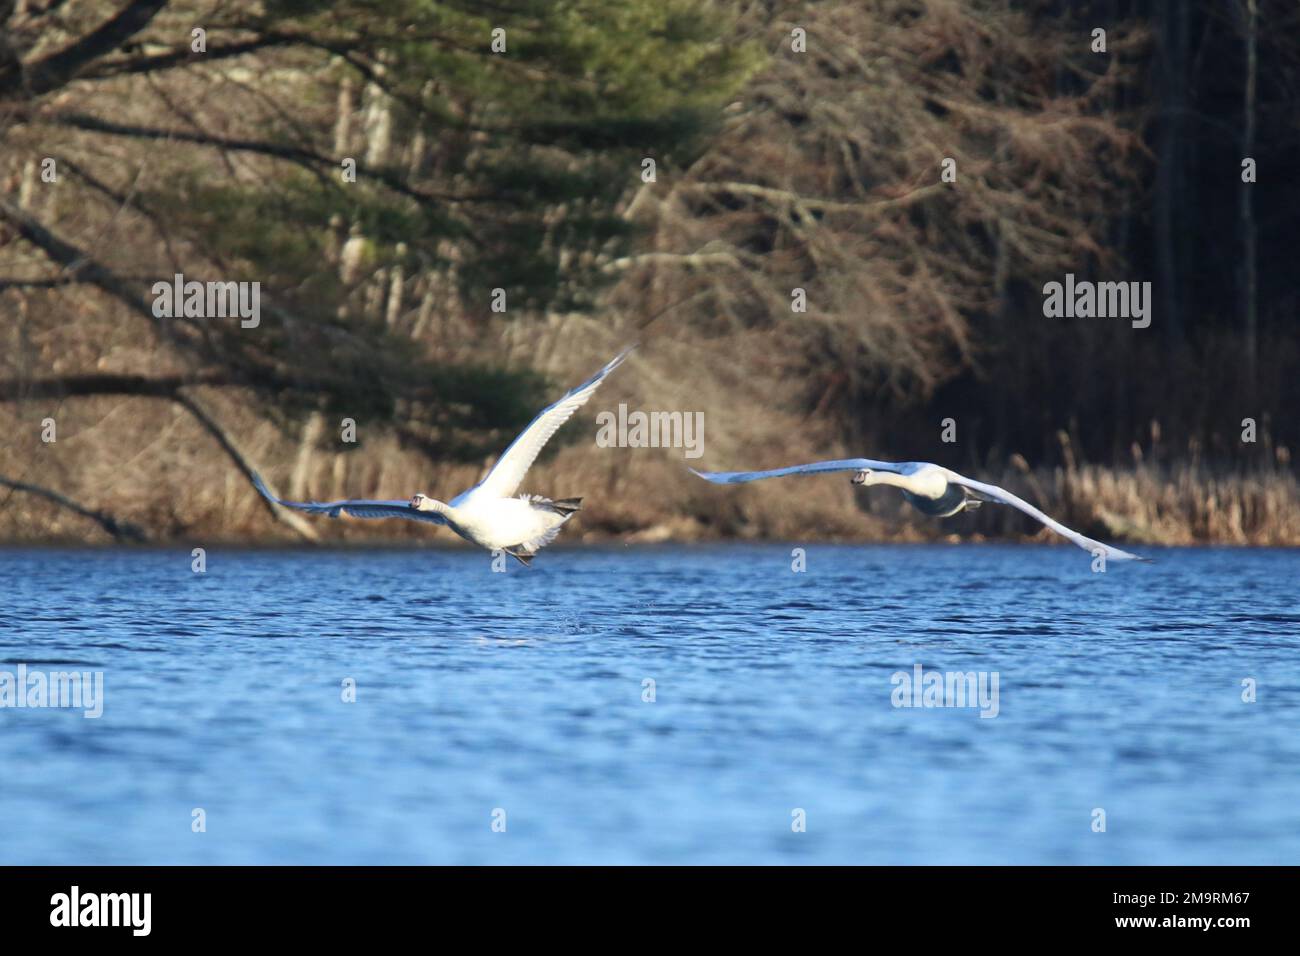 Two mute swans Cygnus olor taking flight from a blue lake in winter Stock Photo